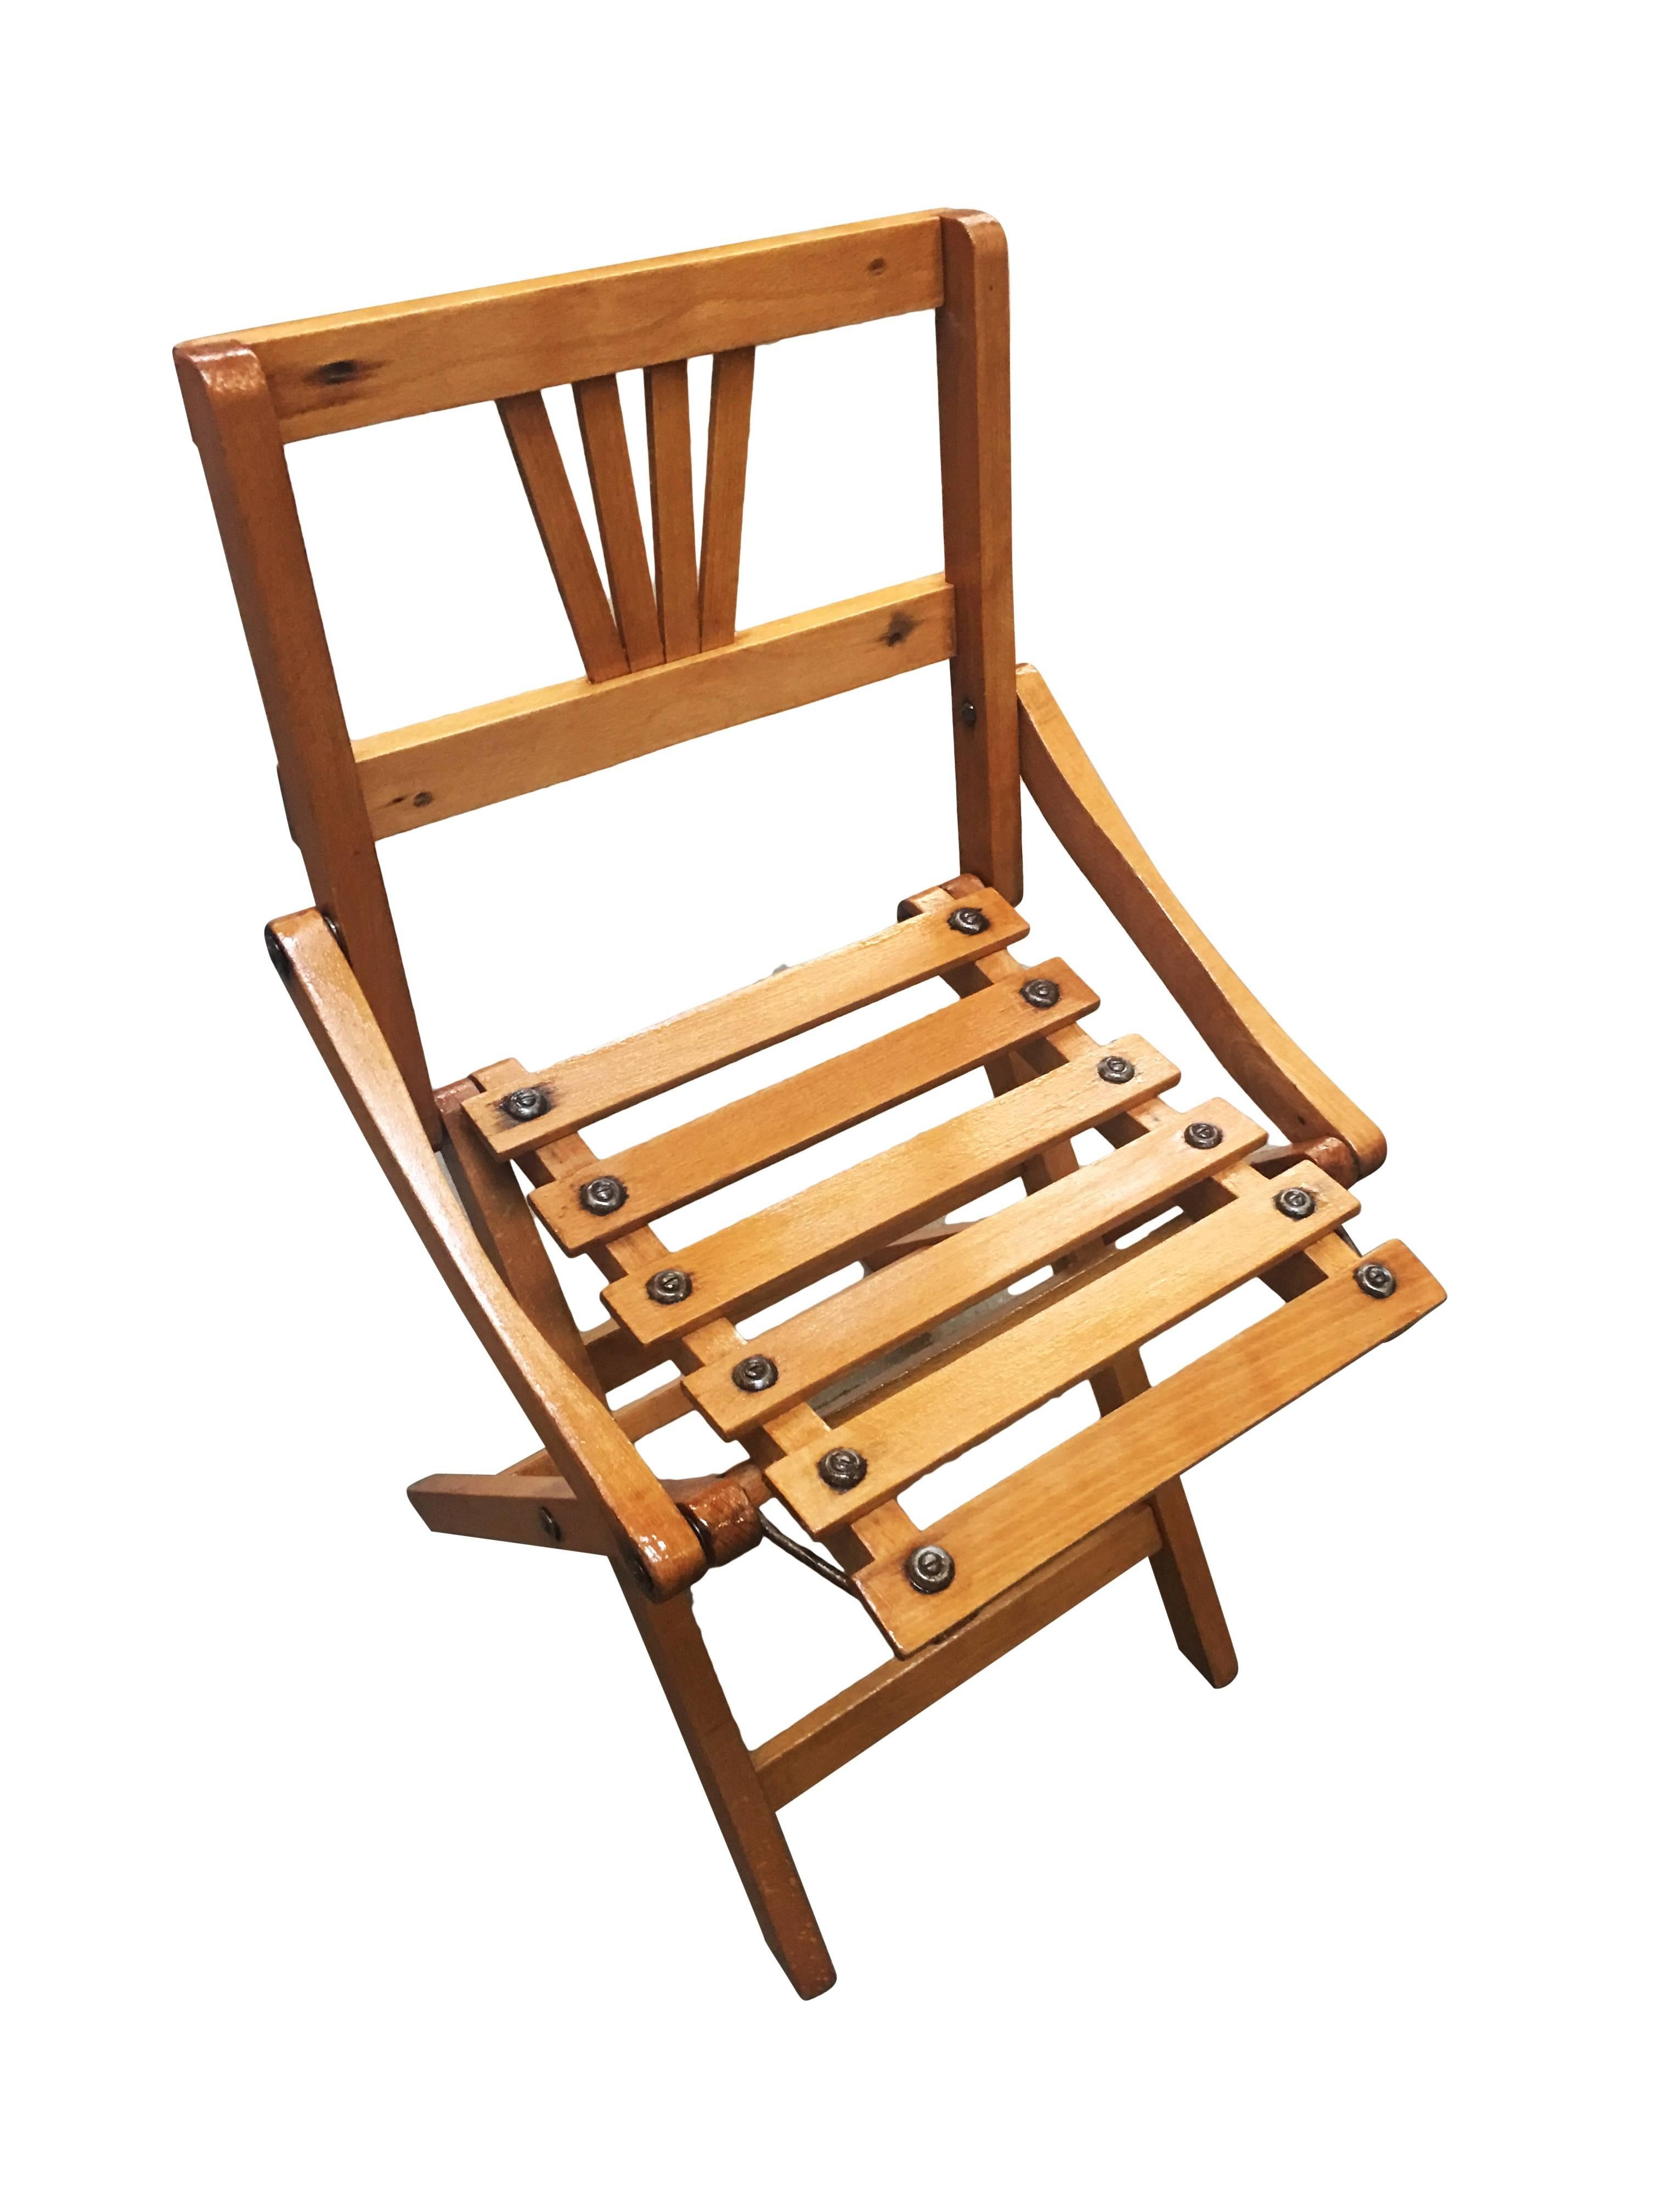 Mid-century children's folding slat wood chair inspired by George Nelson, set of two.